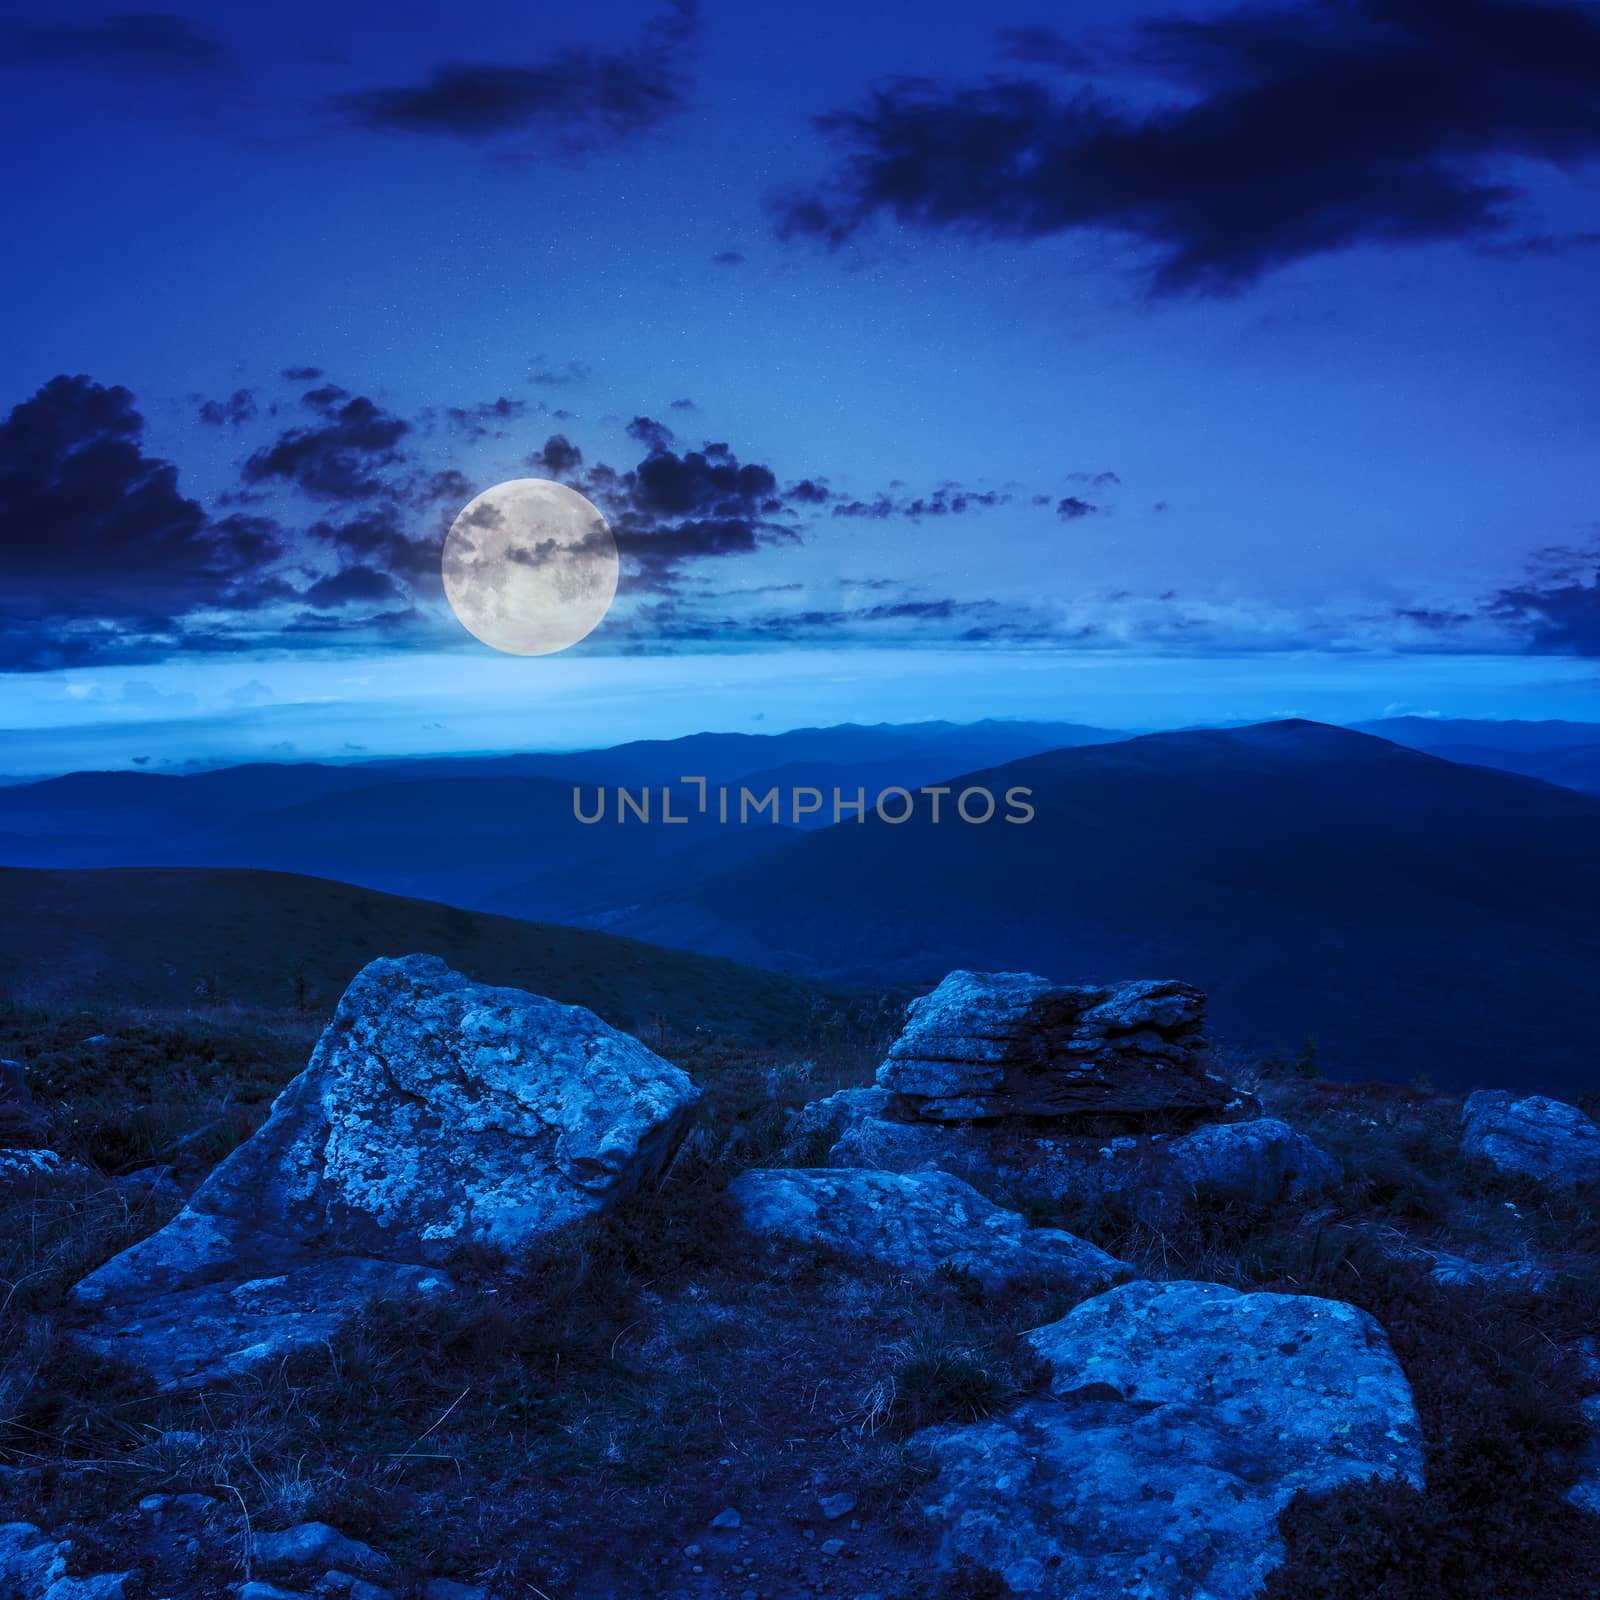 stones on the hillside at night by Pellinni